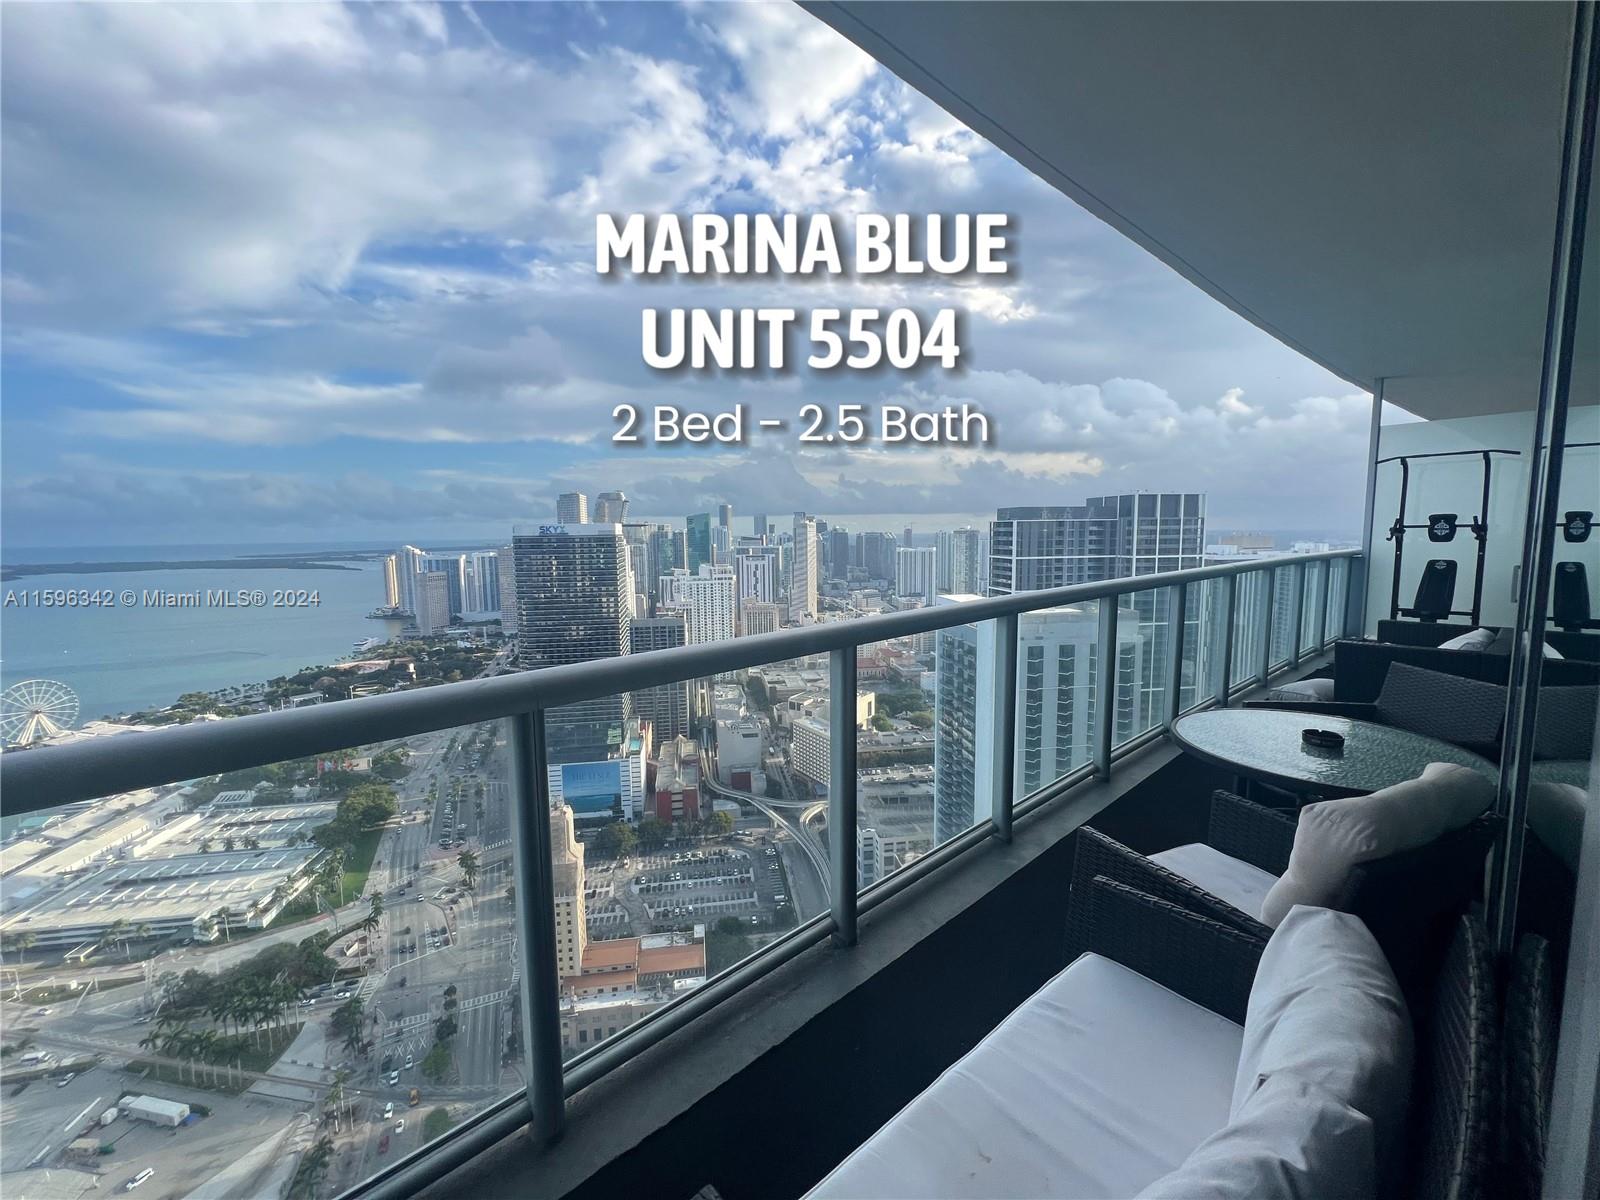 Breathtaking Bay and Skyline views from this spacious 2 bed & 2.5 bath Condo in the most desirable area @ Downtown Miami, with 1,663 SqFt. -- AVAILABLE EARLY Sept 2024 --- Unfurnished --- Unit with stainless steel appliances, W&D & walk-in closet. Conveniently located across the street from the Kaseya Center, just minutes from the beaches, Design District, Museum Park, The Opera and Ballet, Art Museum and Fine Dining. --- Great building amenities: sunrise and sunset pools, 2 hot tubs, 24-hr security and concierge, valet parking, bsns center, fitness center, club room. --Landlord requires: Full background, eviction and credit report. Income/employment verification. - TEXT ME TO SEND YOU THE LISTING VIDEO